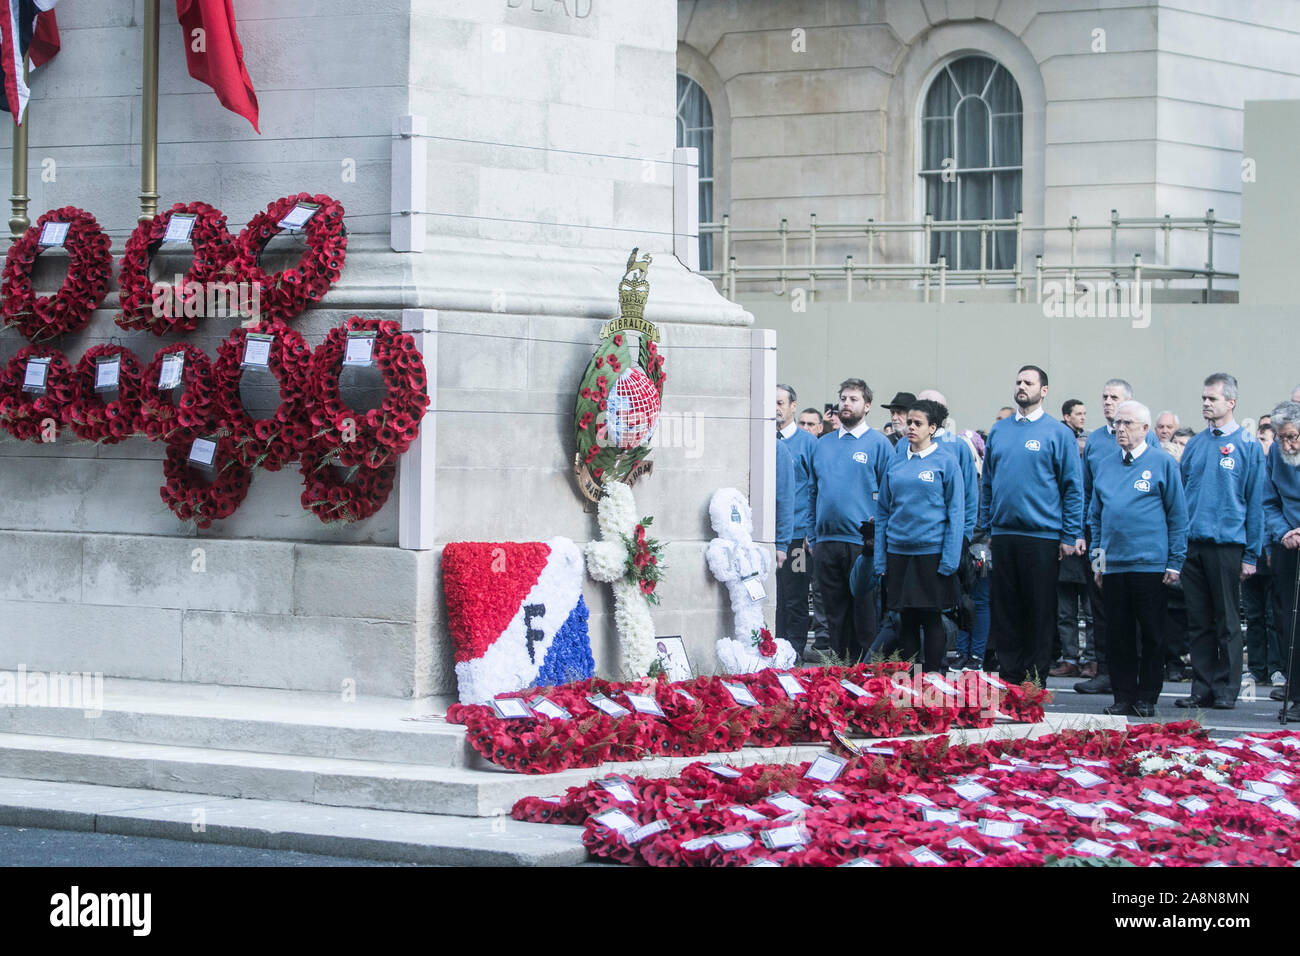 London, UK. 10 Ex-services personnel from Veterans For Peace attend the Remembrance Sunday ceremony at the Cenotaph in Whitehall . Veterans For Peace  VFP UK was founded in 2011 and works to influence British  foreign and defence policy  for  world peace London. amer ghazzal /Alamy live News Stock Photo